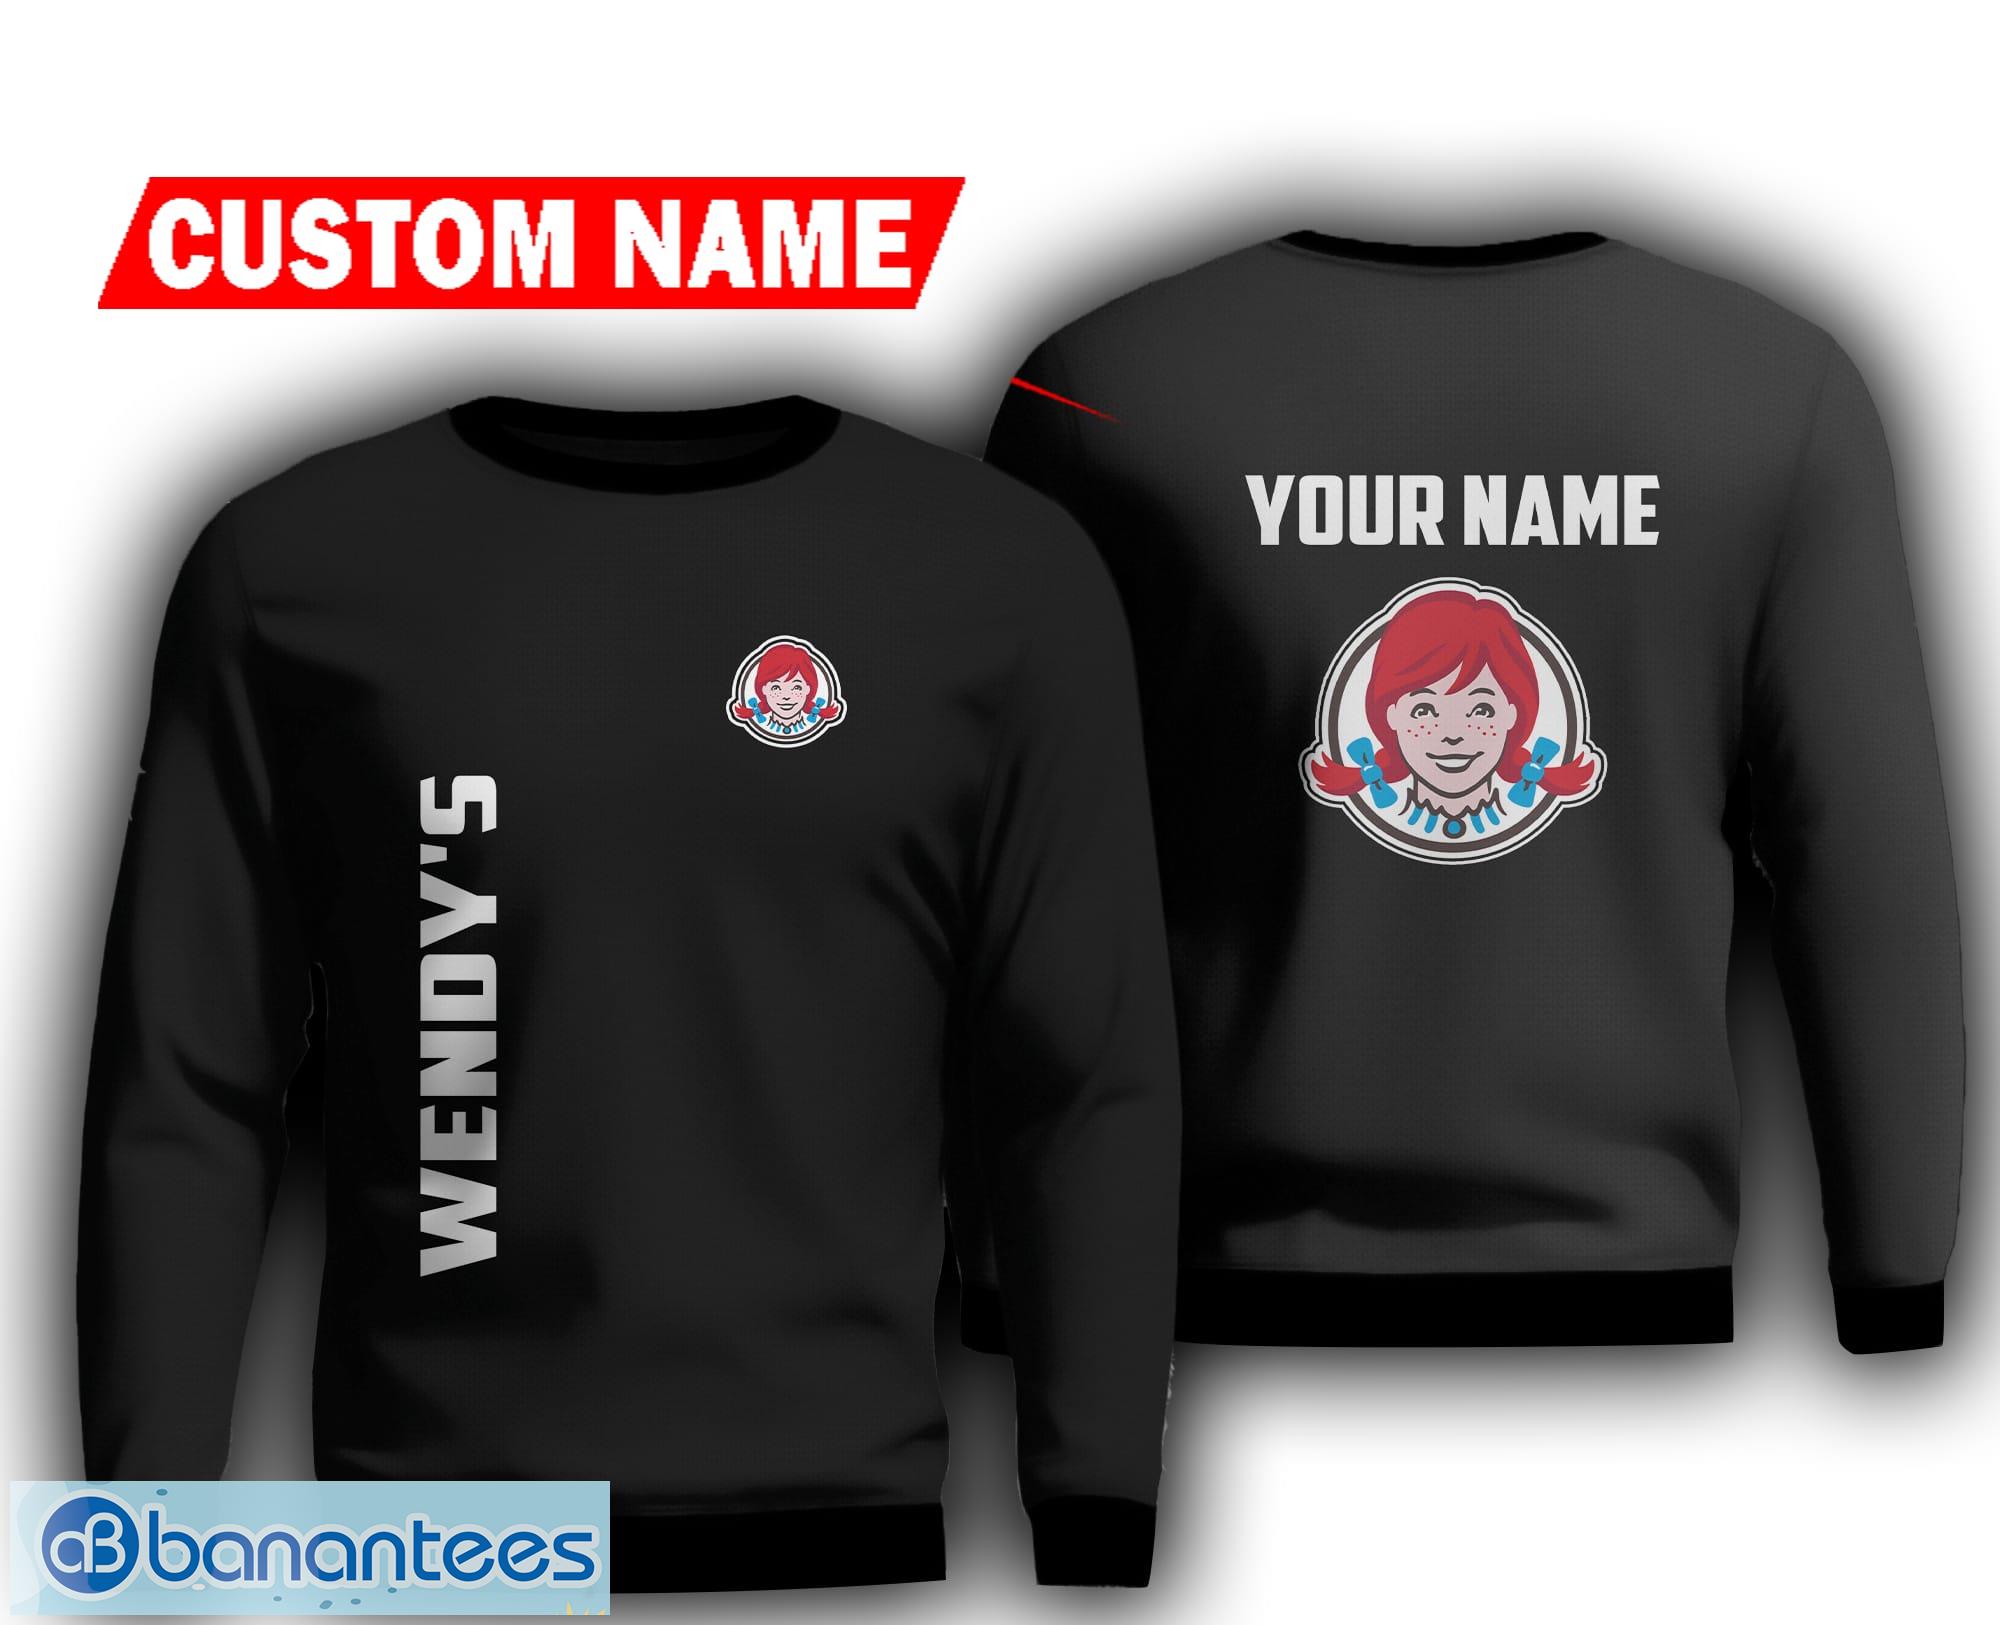 wendys Brand Light Ugly Sweater size 3D Christmas Sweatshirt Custom Name - wendys Brand Light Ugly Sweater size 3D Christmas Sweatshirt Custom Name